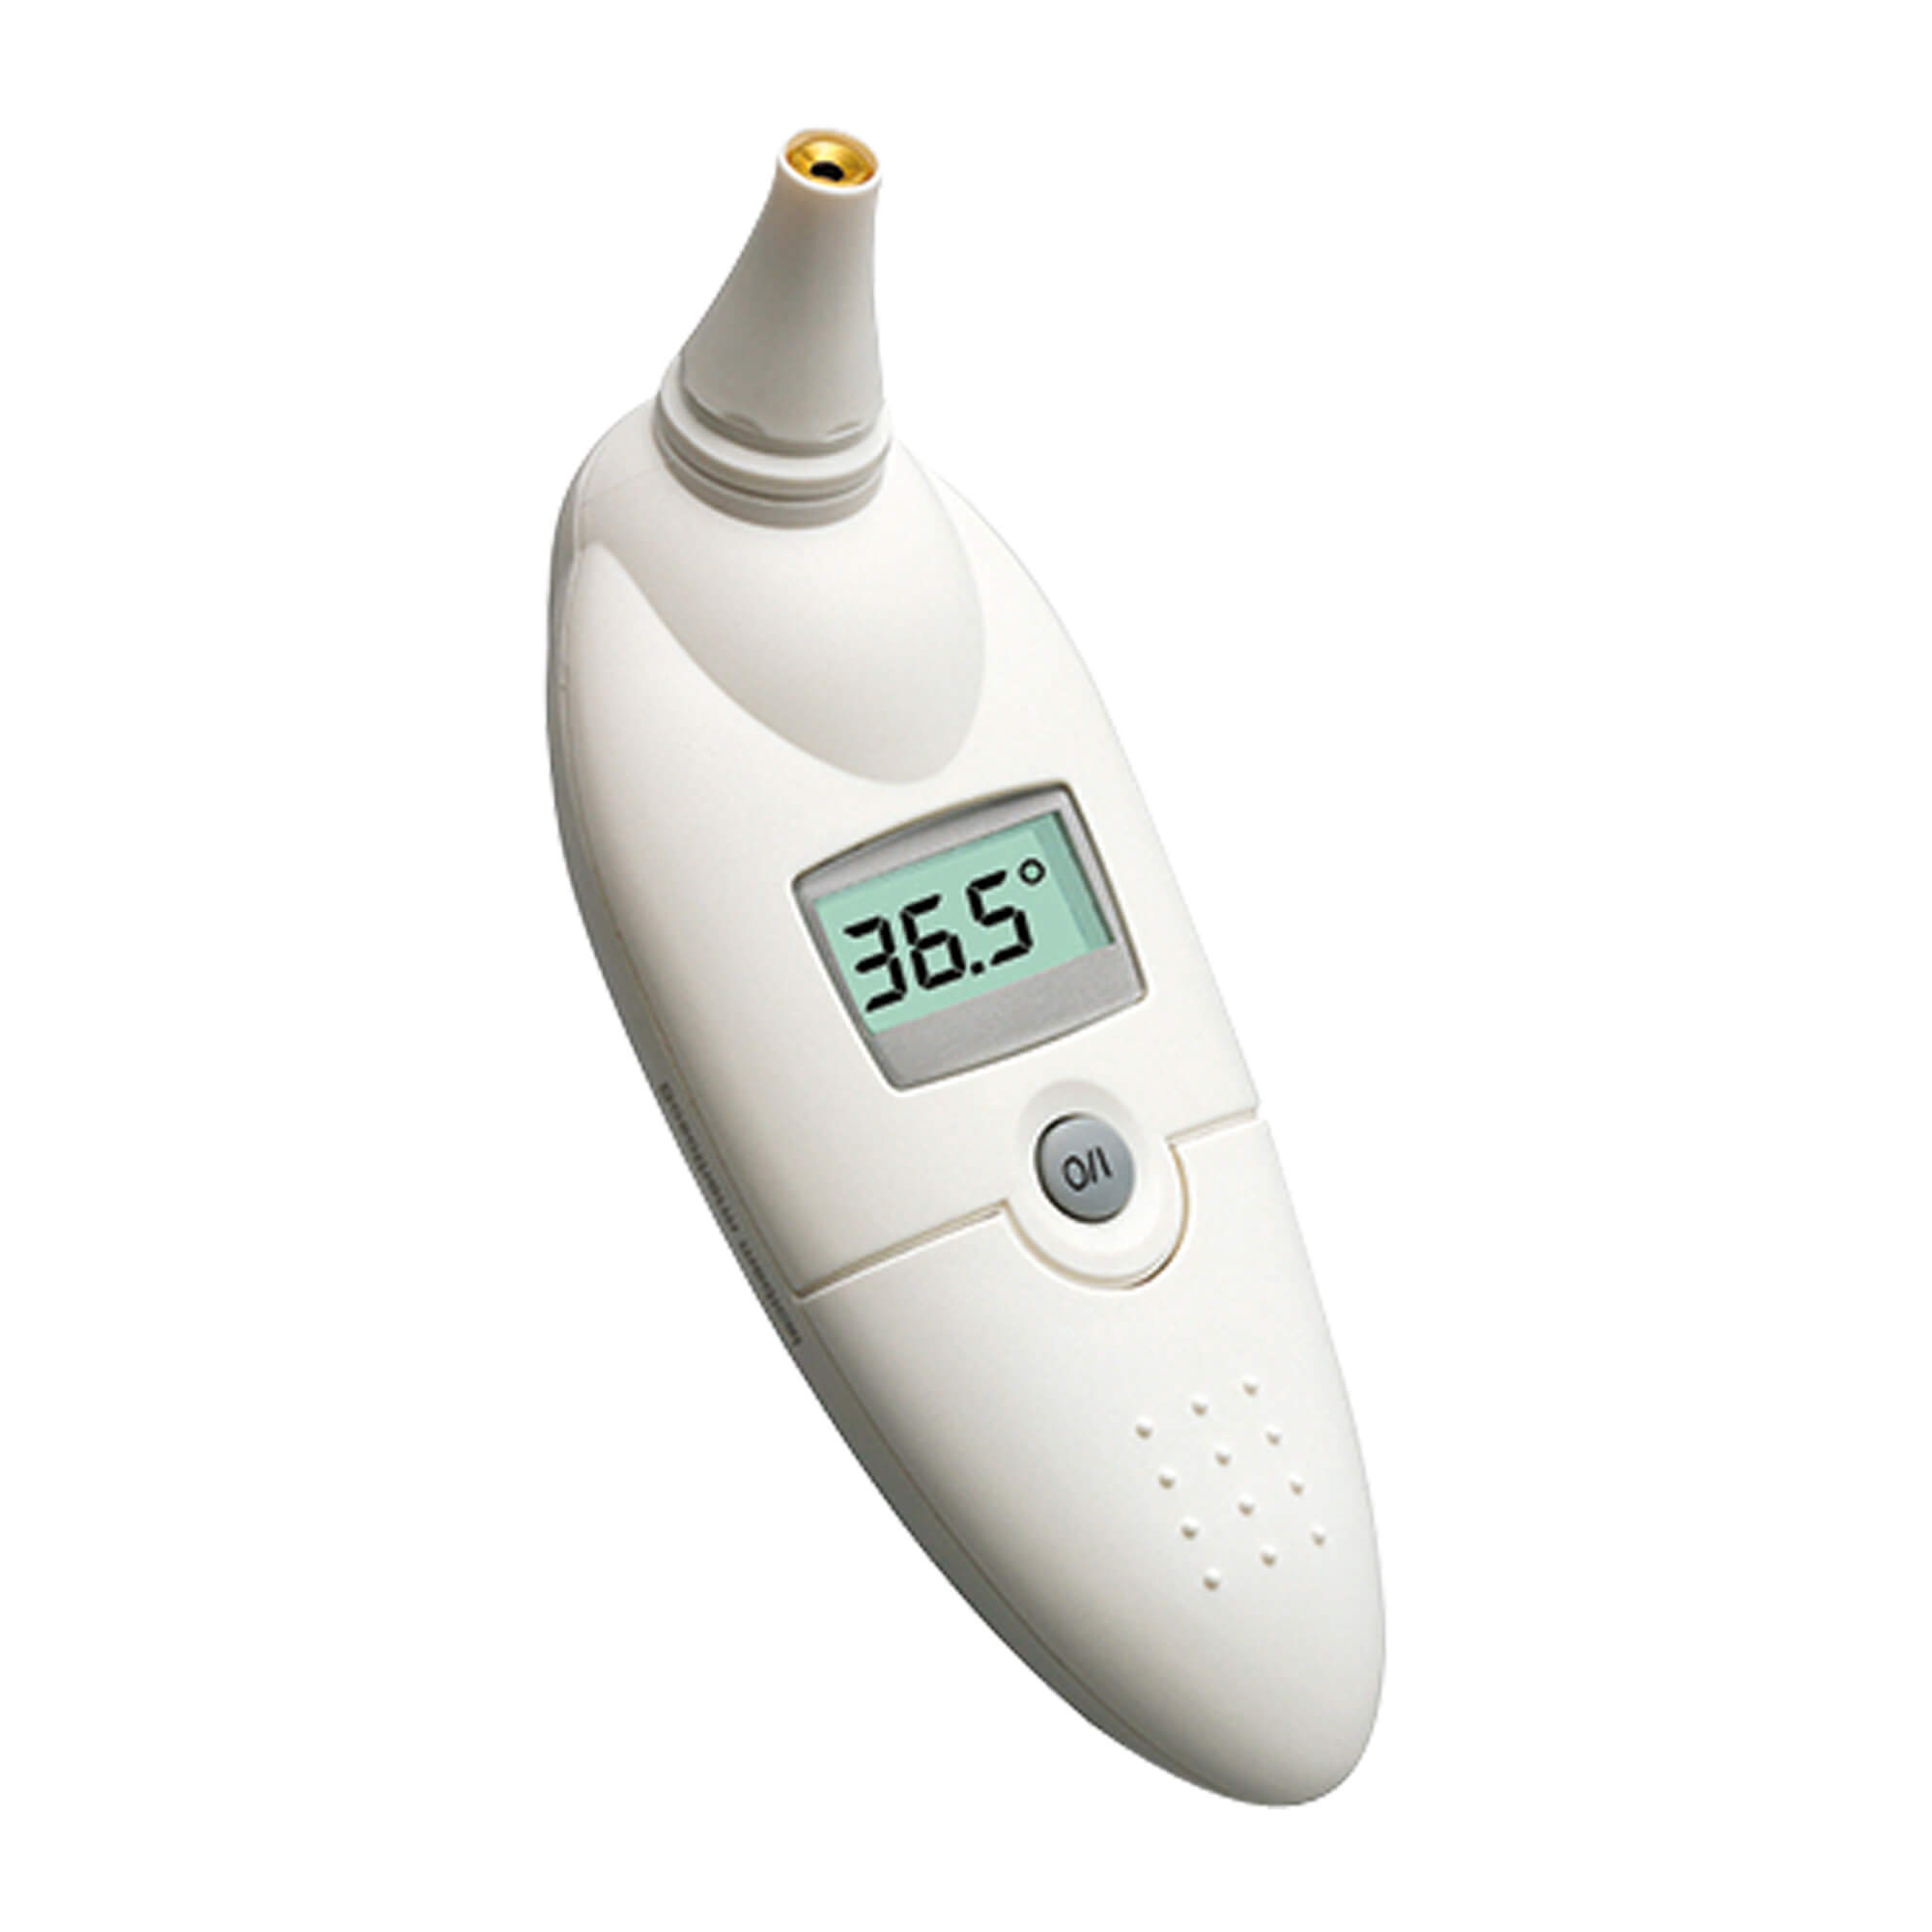 Bosotherm medical Ohr Thermometer